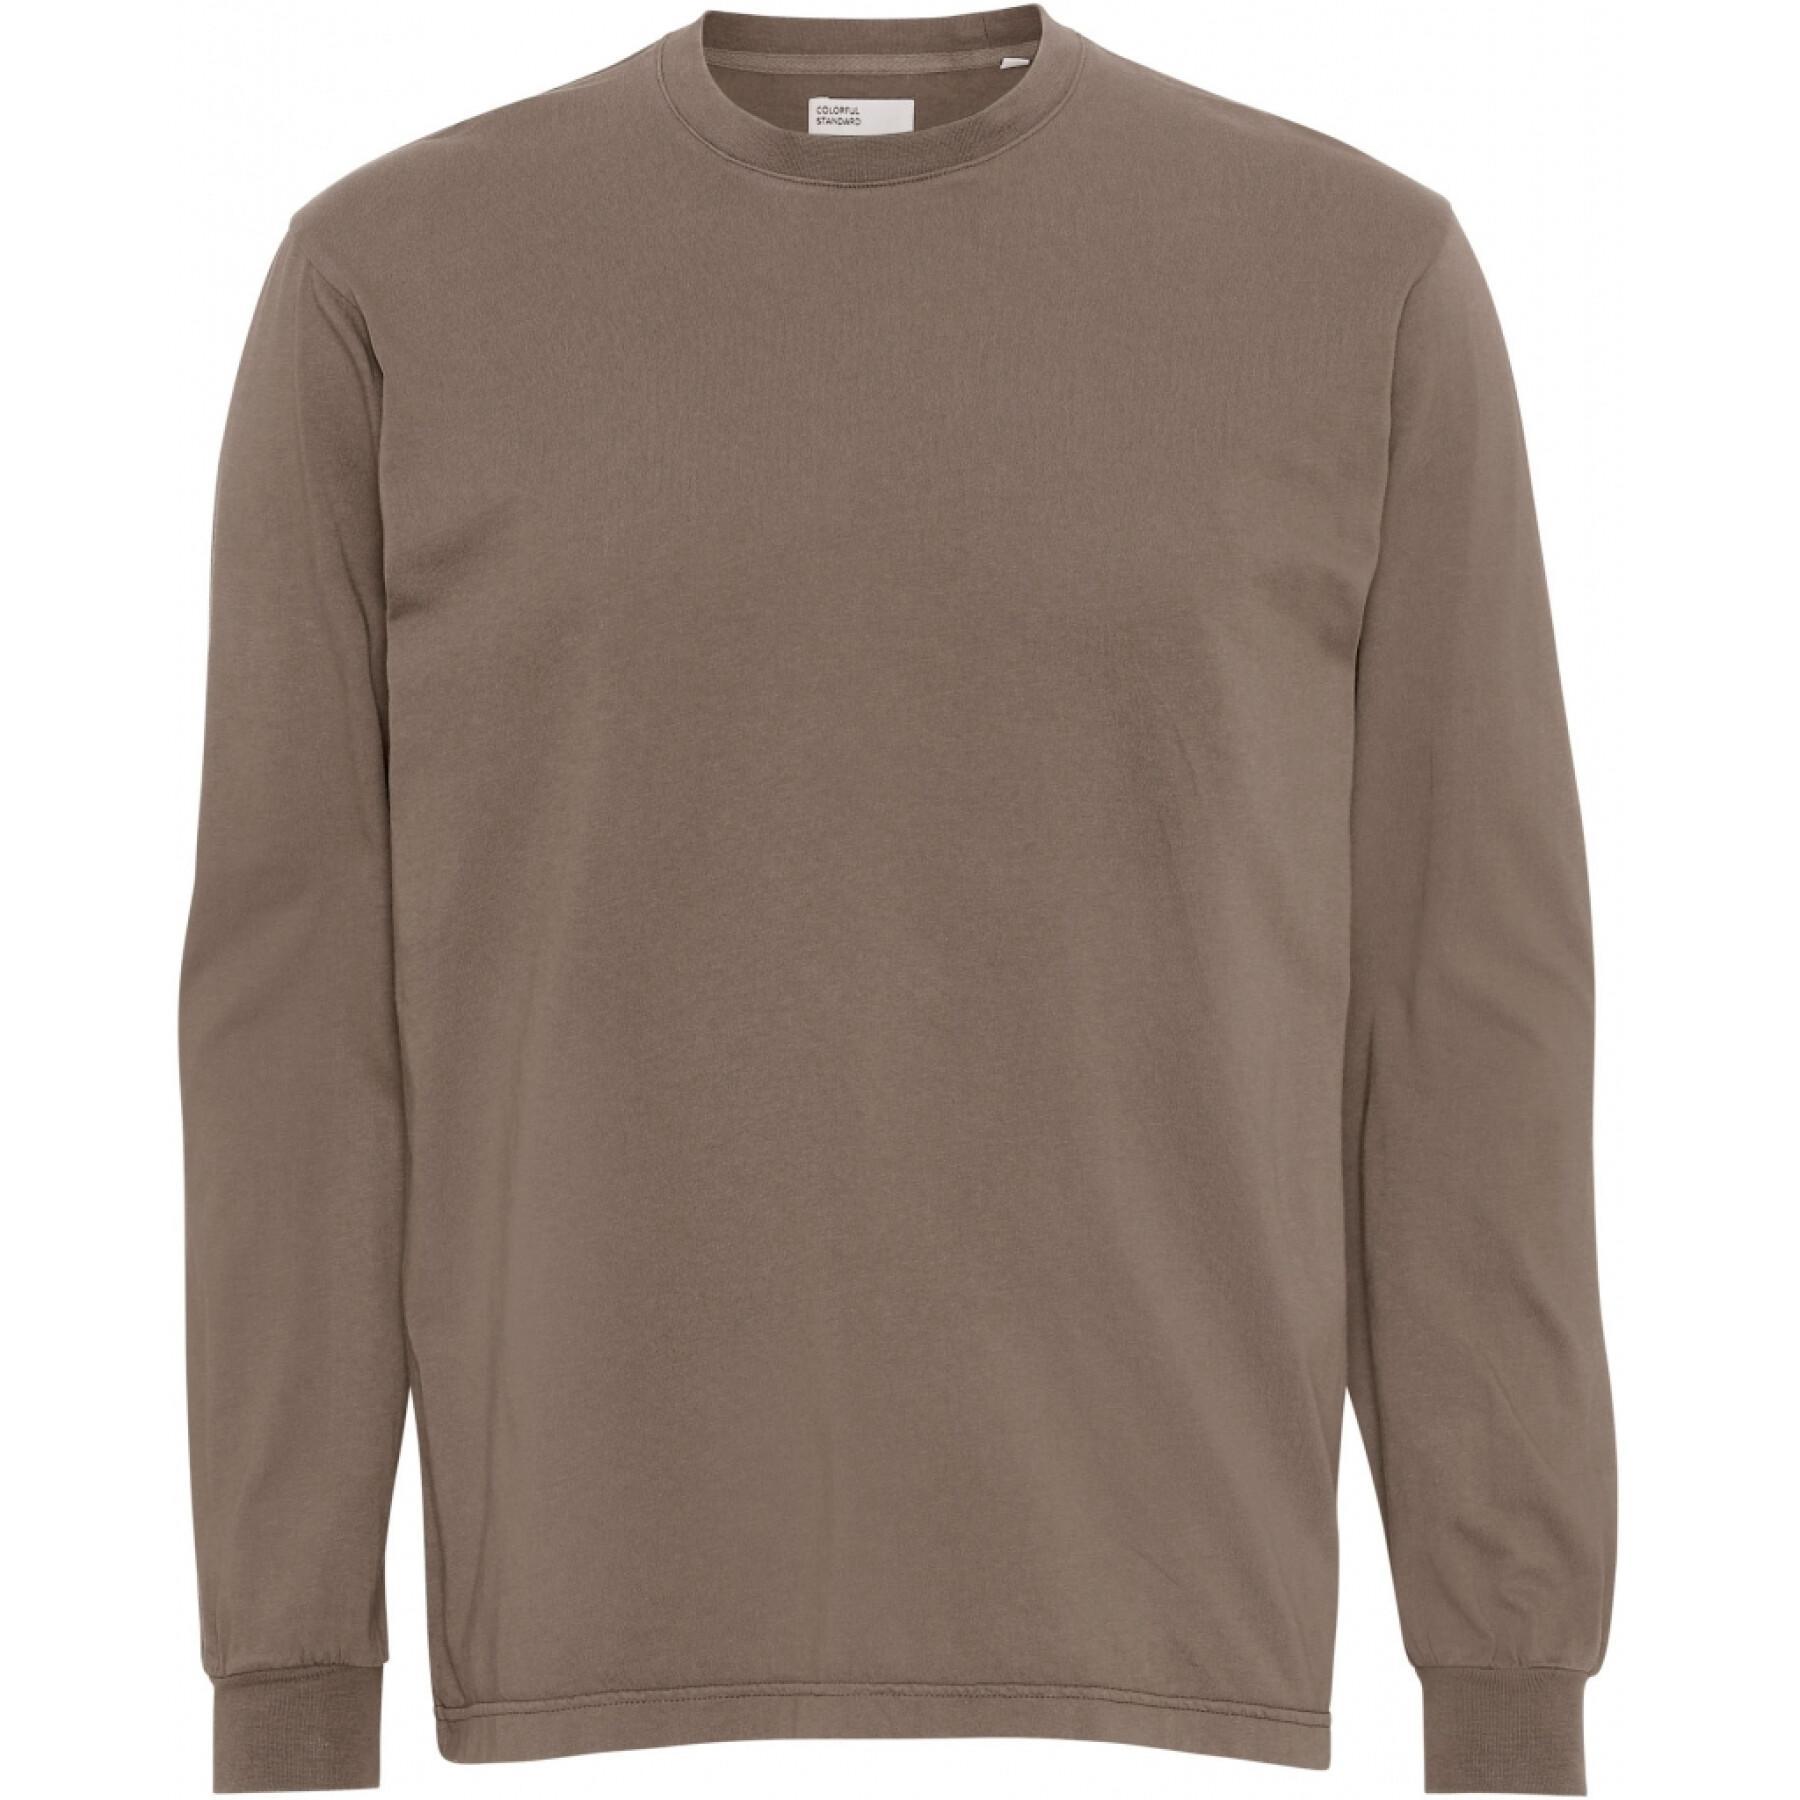 Long sleeve T-shirt Colorful Standard Organic oversized warm taupe